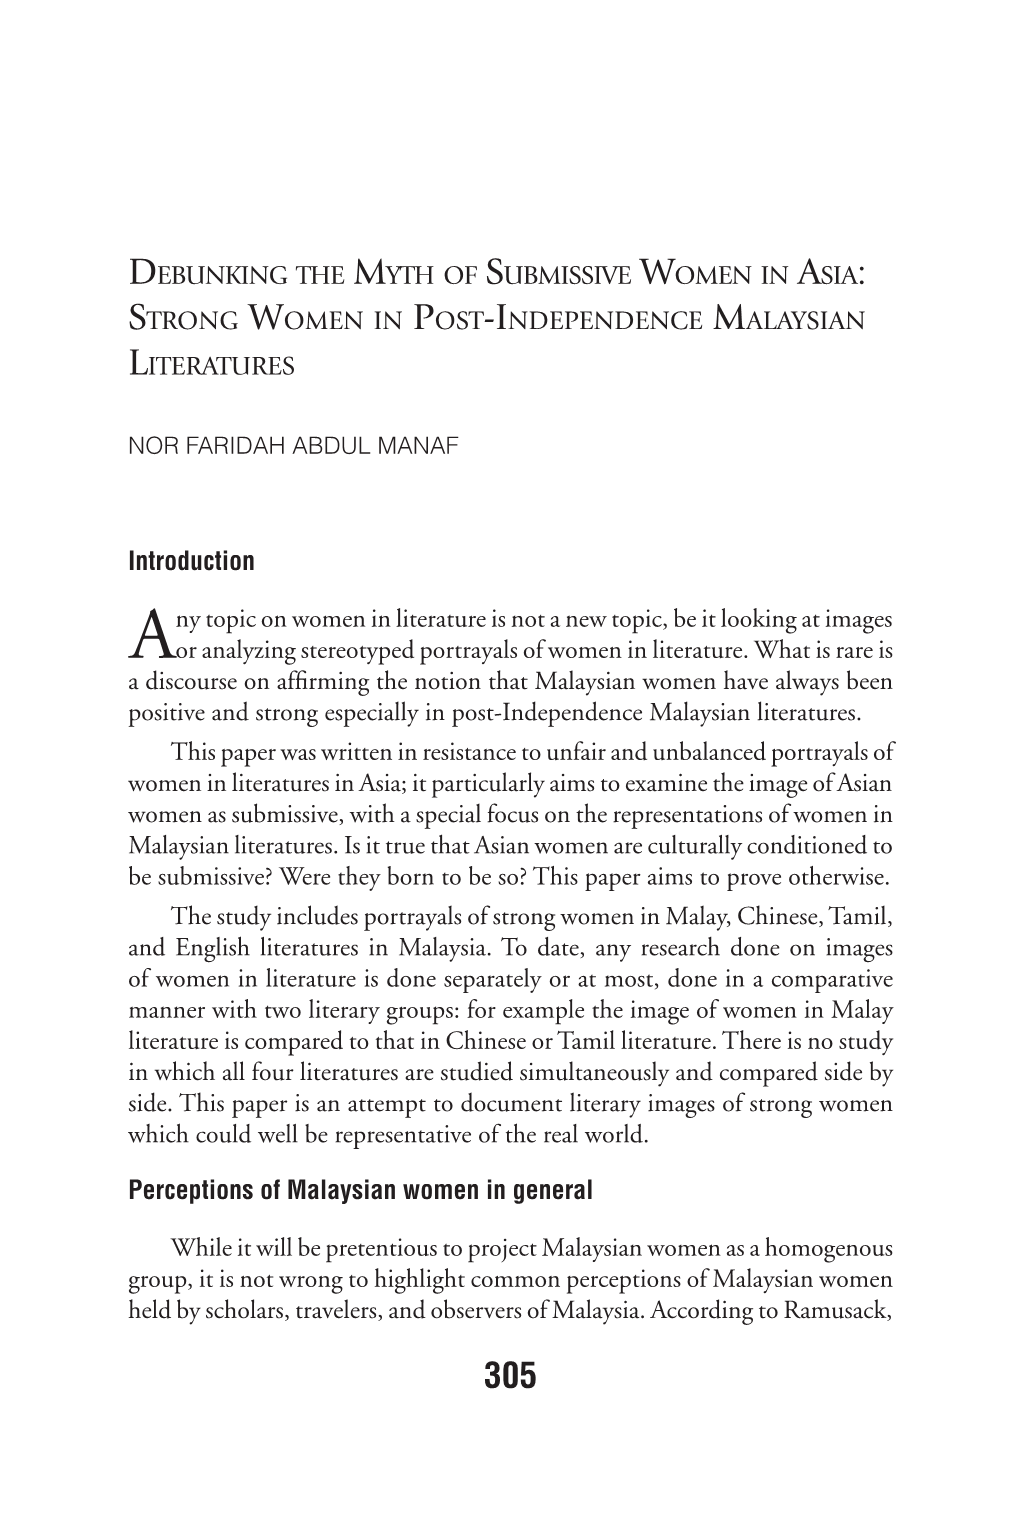 Debunking the Myth of Submissive Women in Asia: Strong Women in Post-Independence Malaysian Literatures